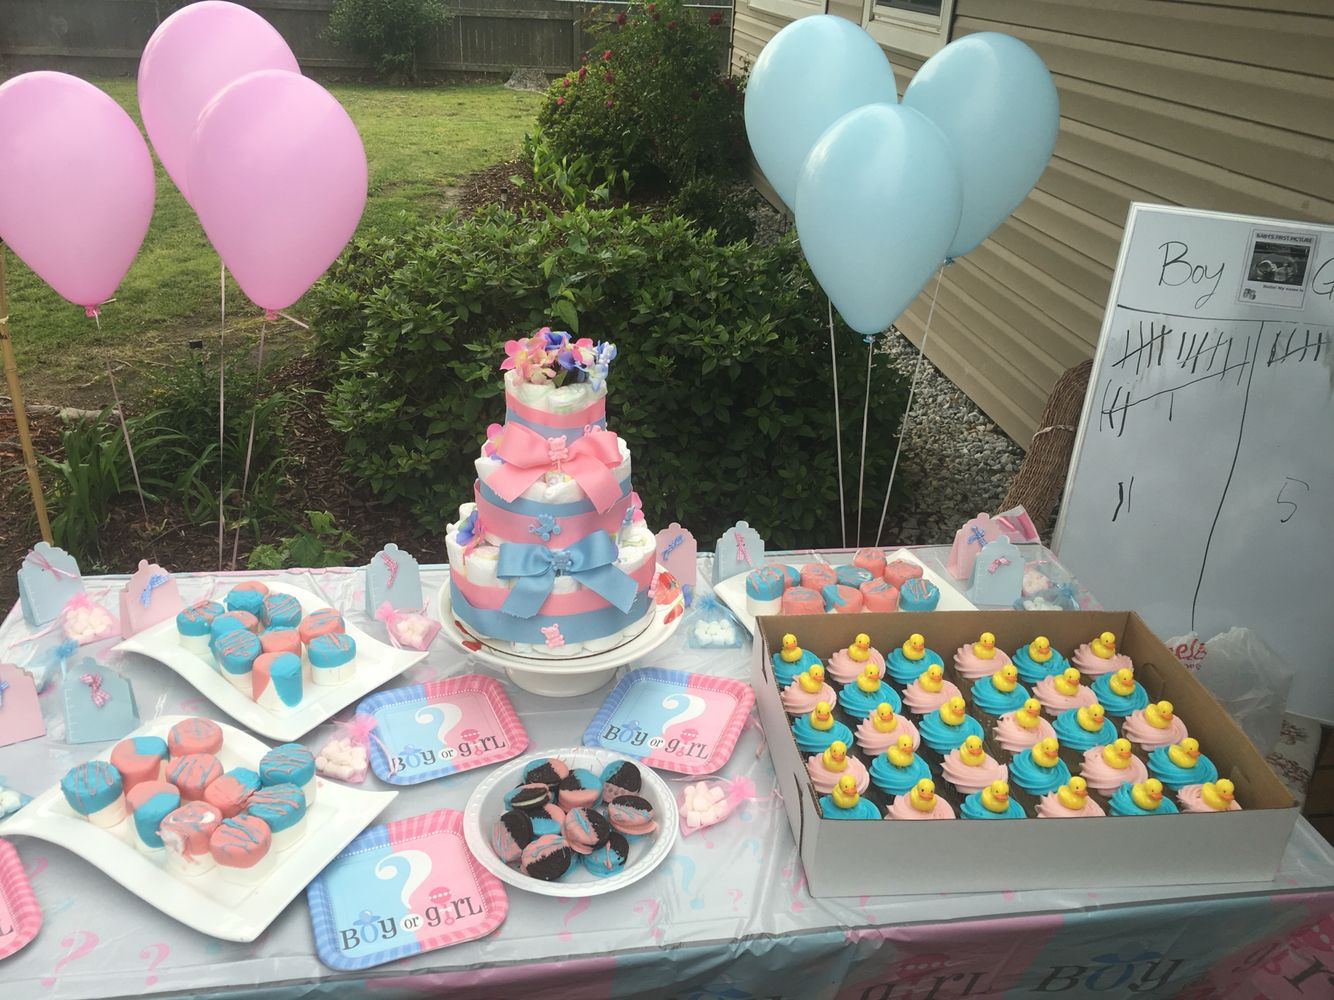 Walmart Baby Shower Party Decorations
 Affordable Gender reveal party Walmart decorations and